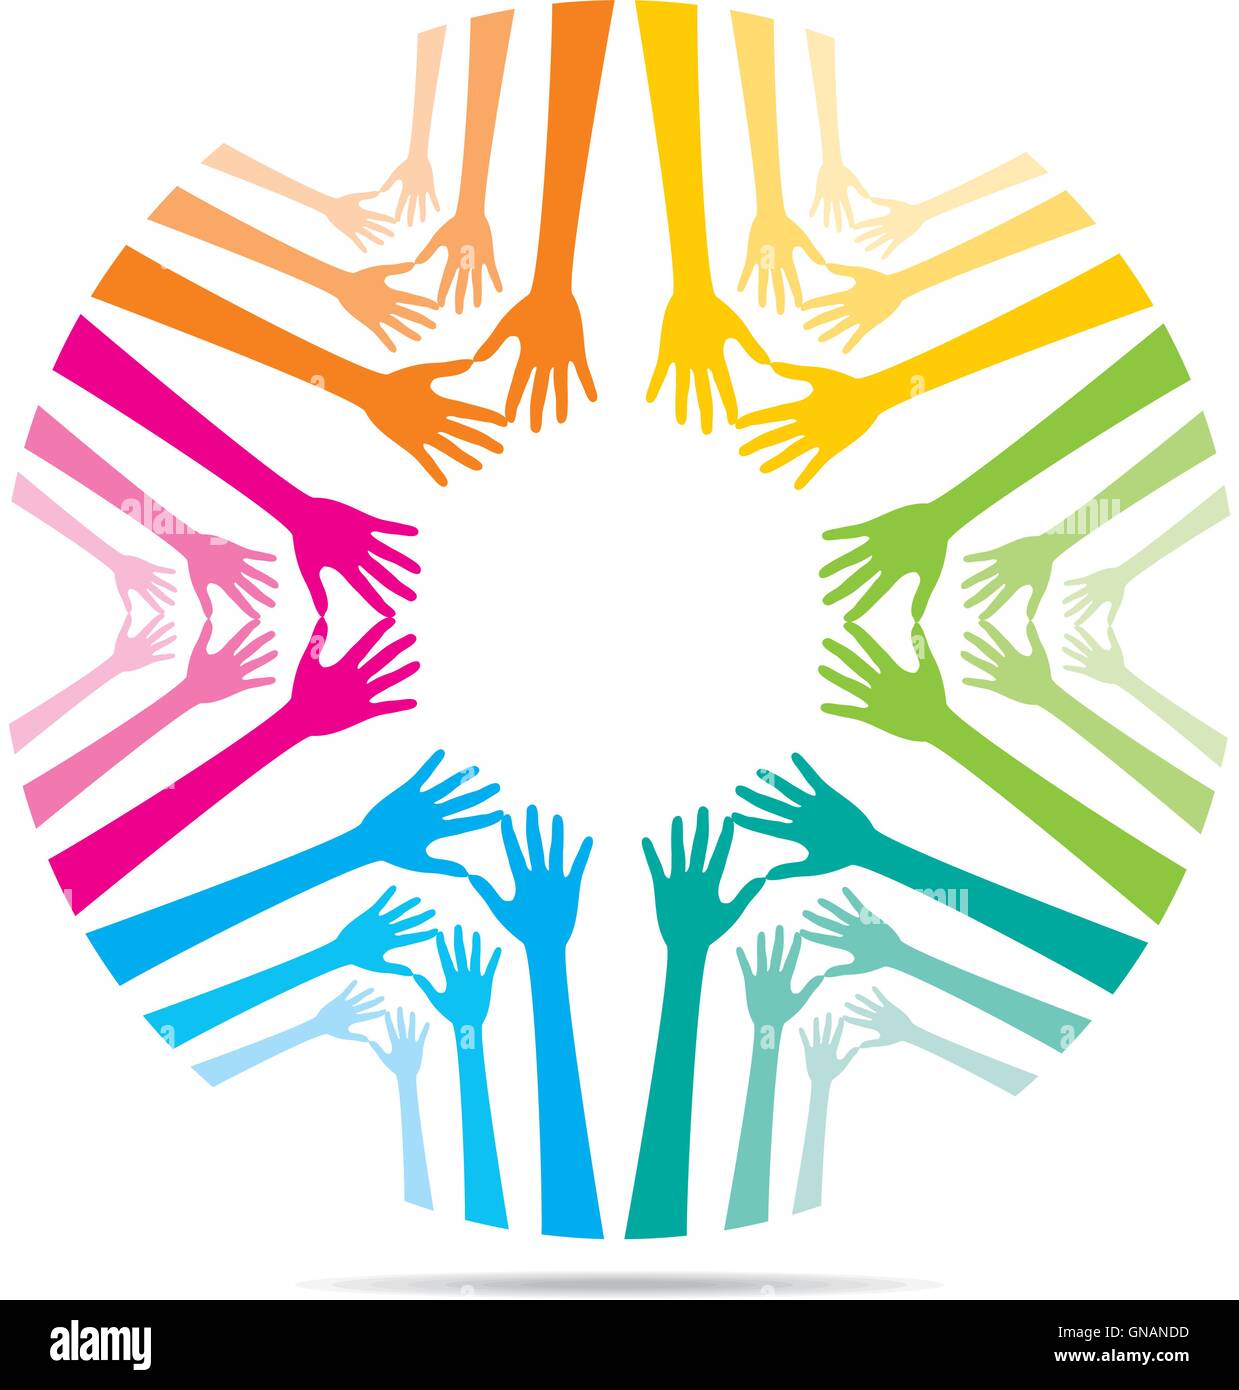 colorful helping hand community concept design vector Stock Vector